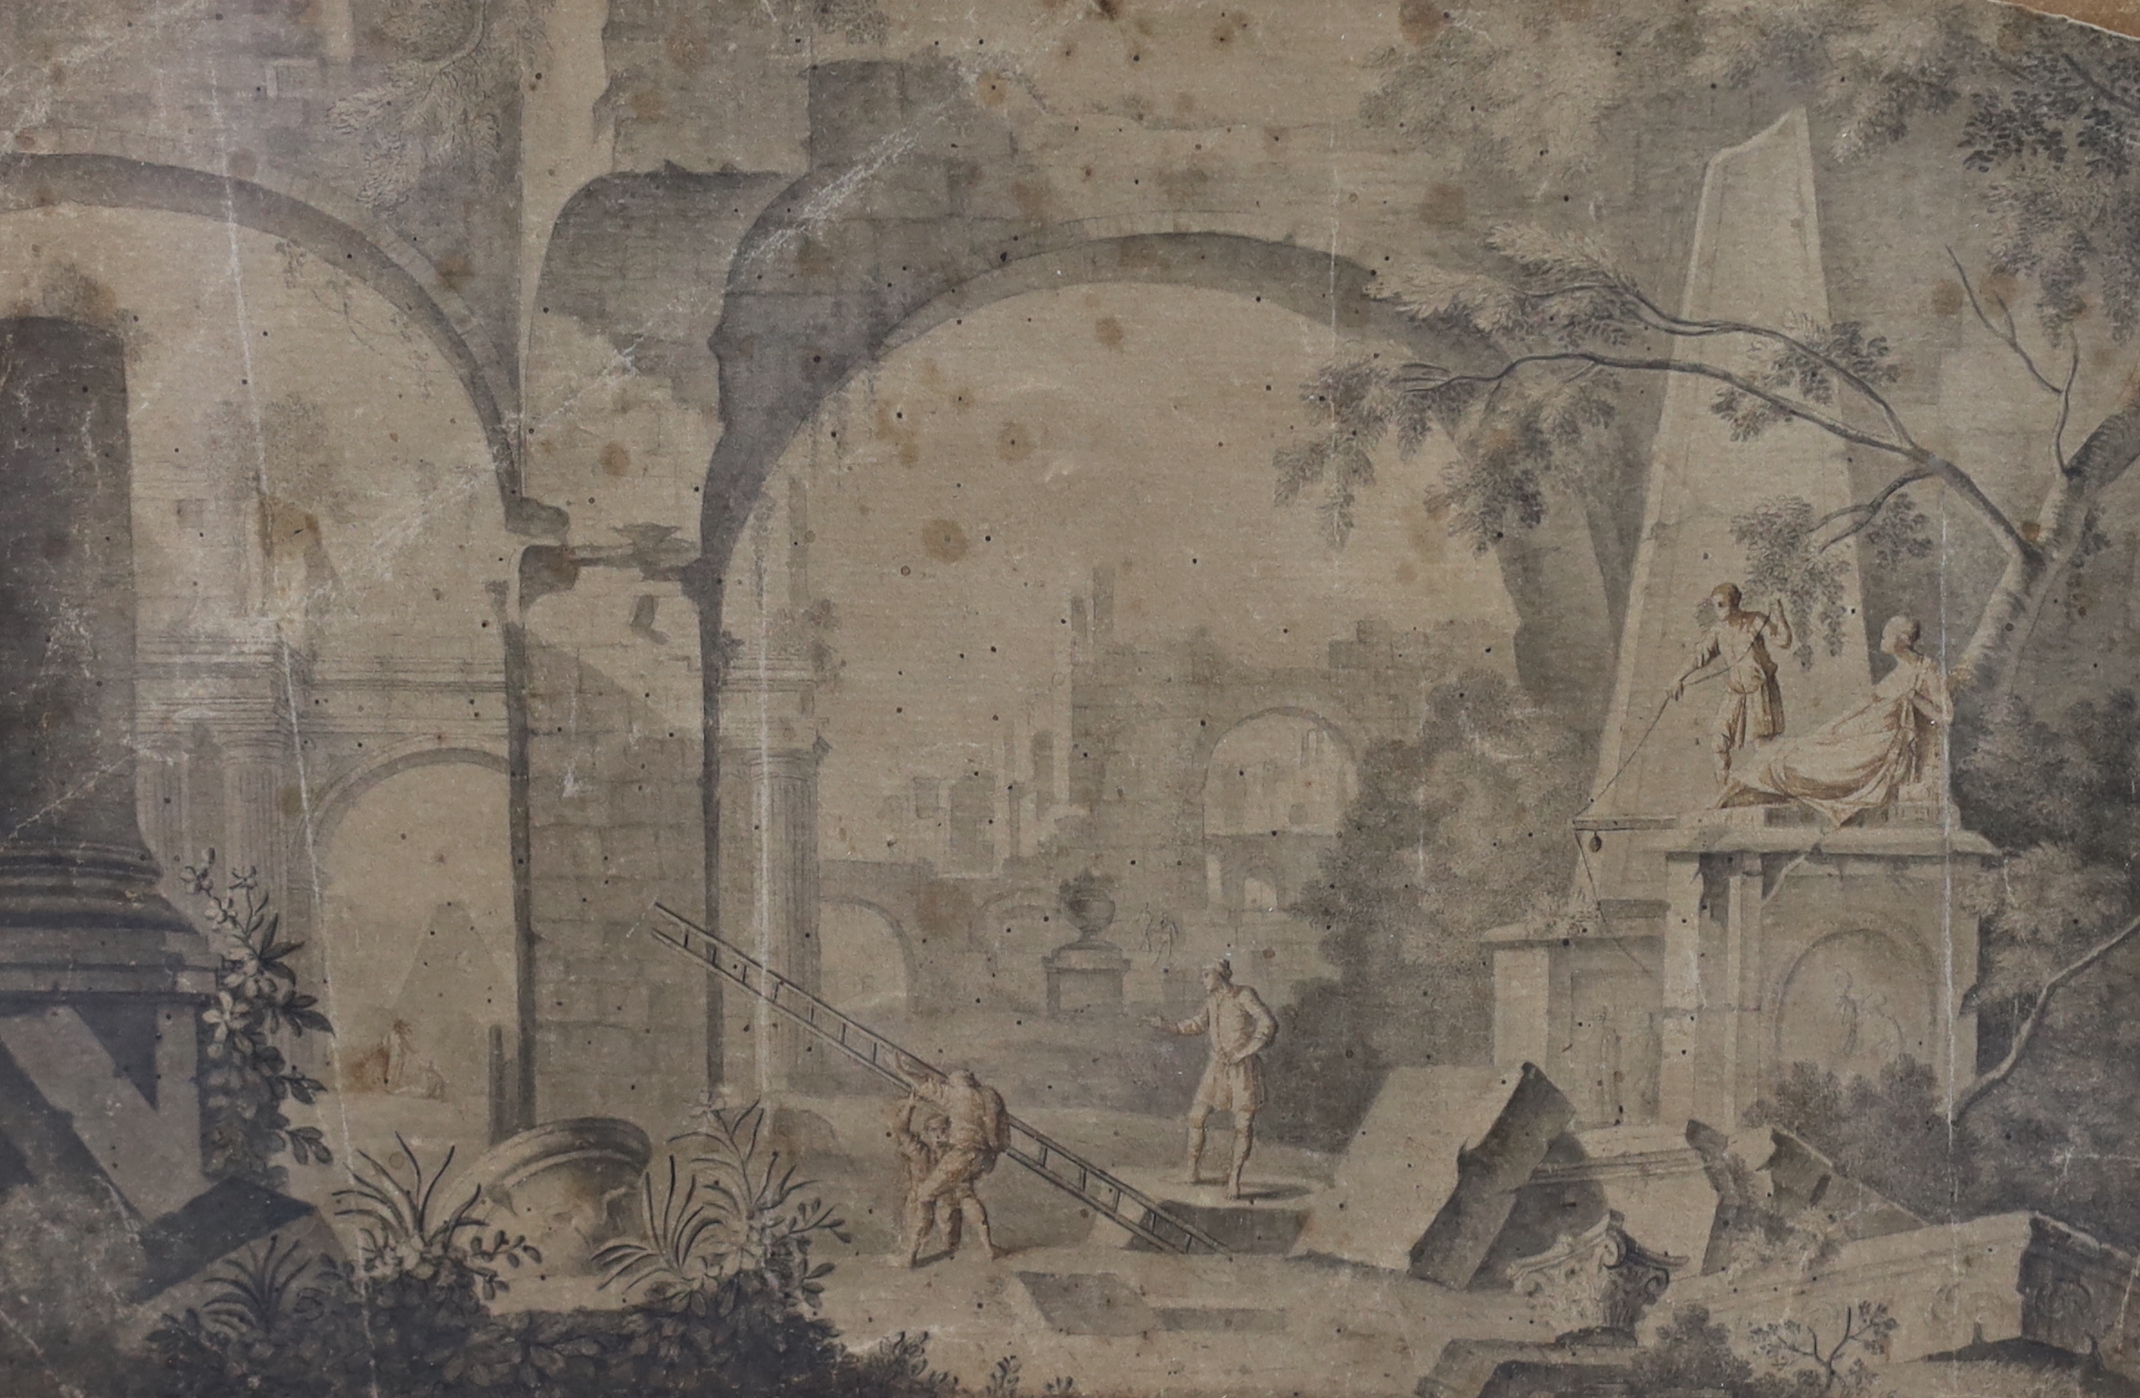 Circle of Marco Ricci (Italian, 1676-1729), Architectural Capriccio with Figures amongst Ruins, watercolour on paper, 19.5 x 29.5cm